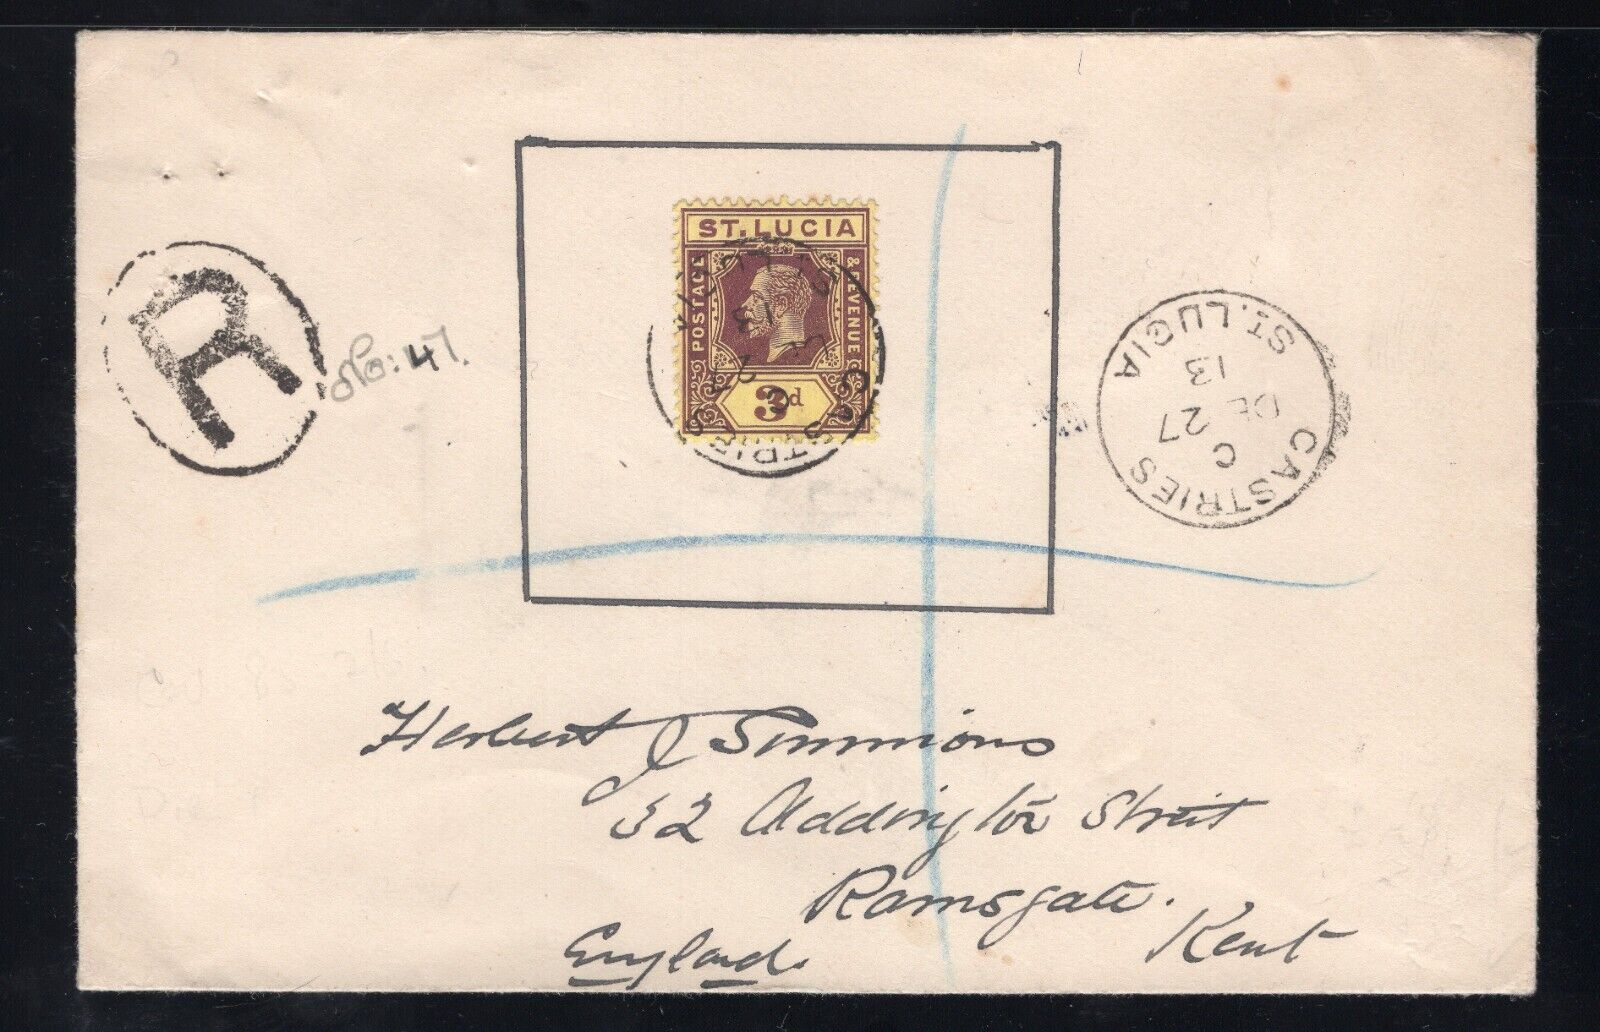 St. Lucia 1913 Registered Cover To Ramsgate, England With 3d George V, Scott 68